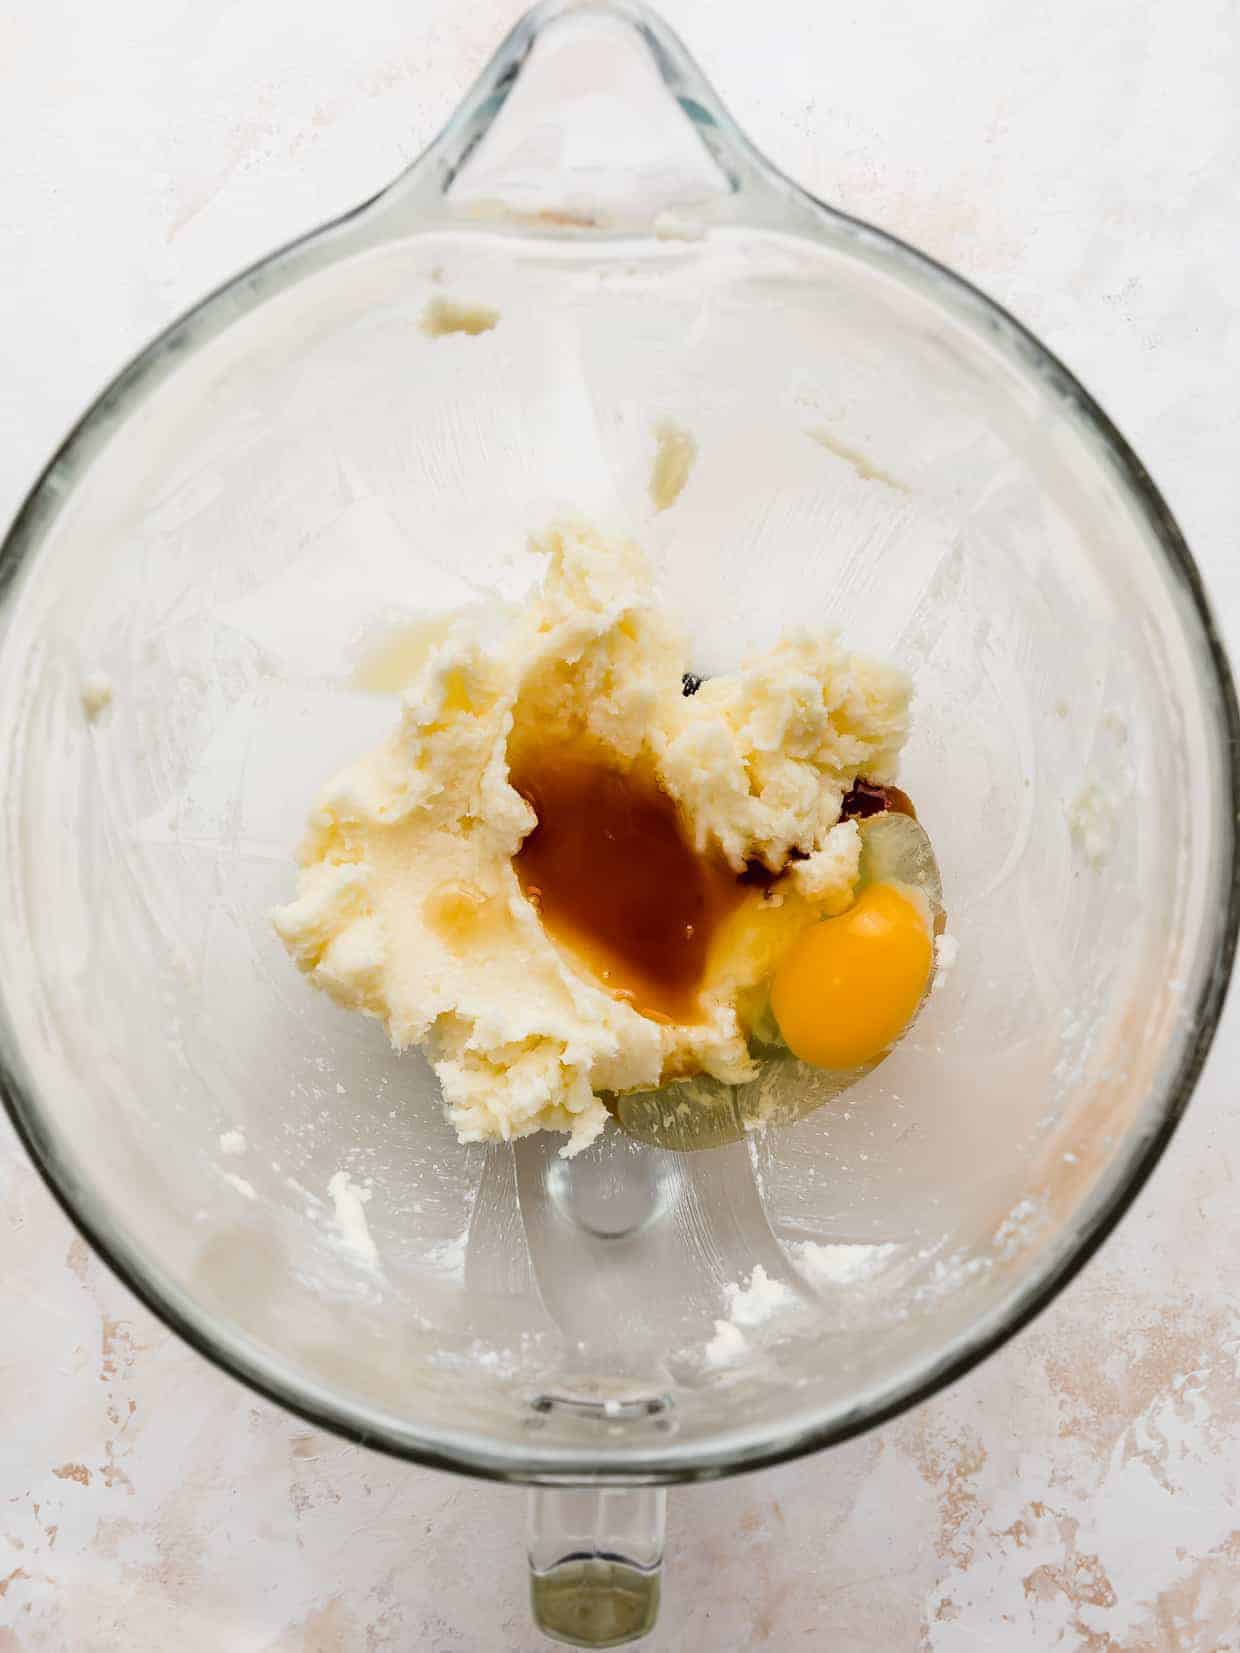 A glass bowl with creamed butter and sugar, vanilla extract, and a cracked egg in it, against a white background.